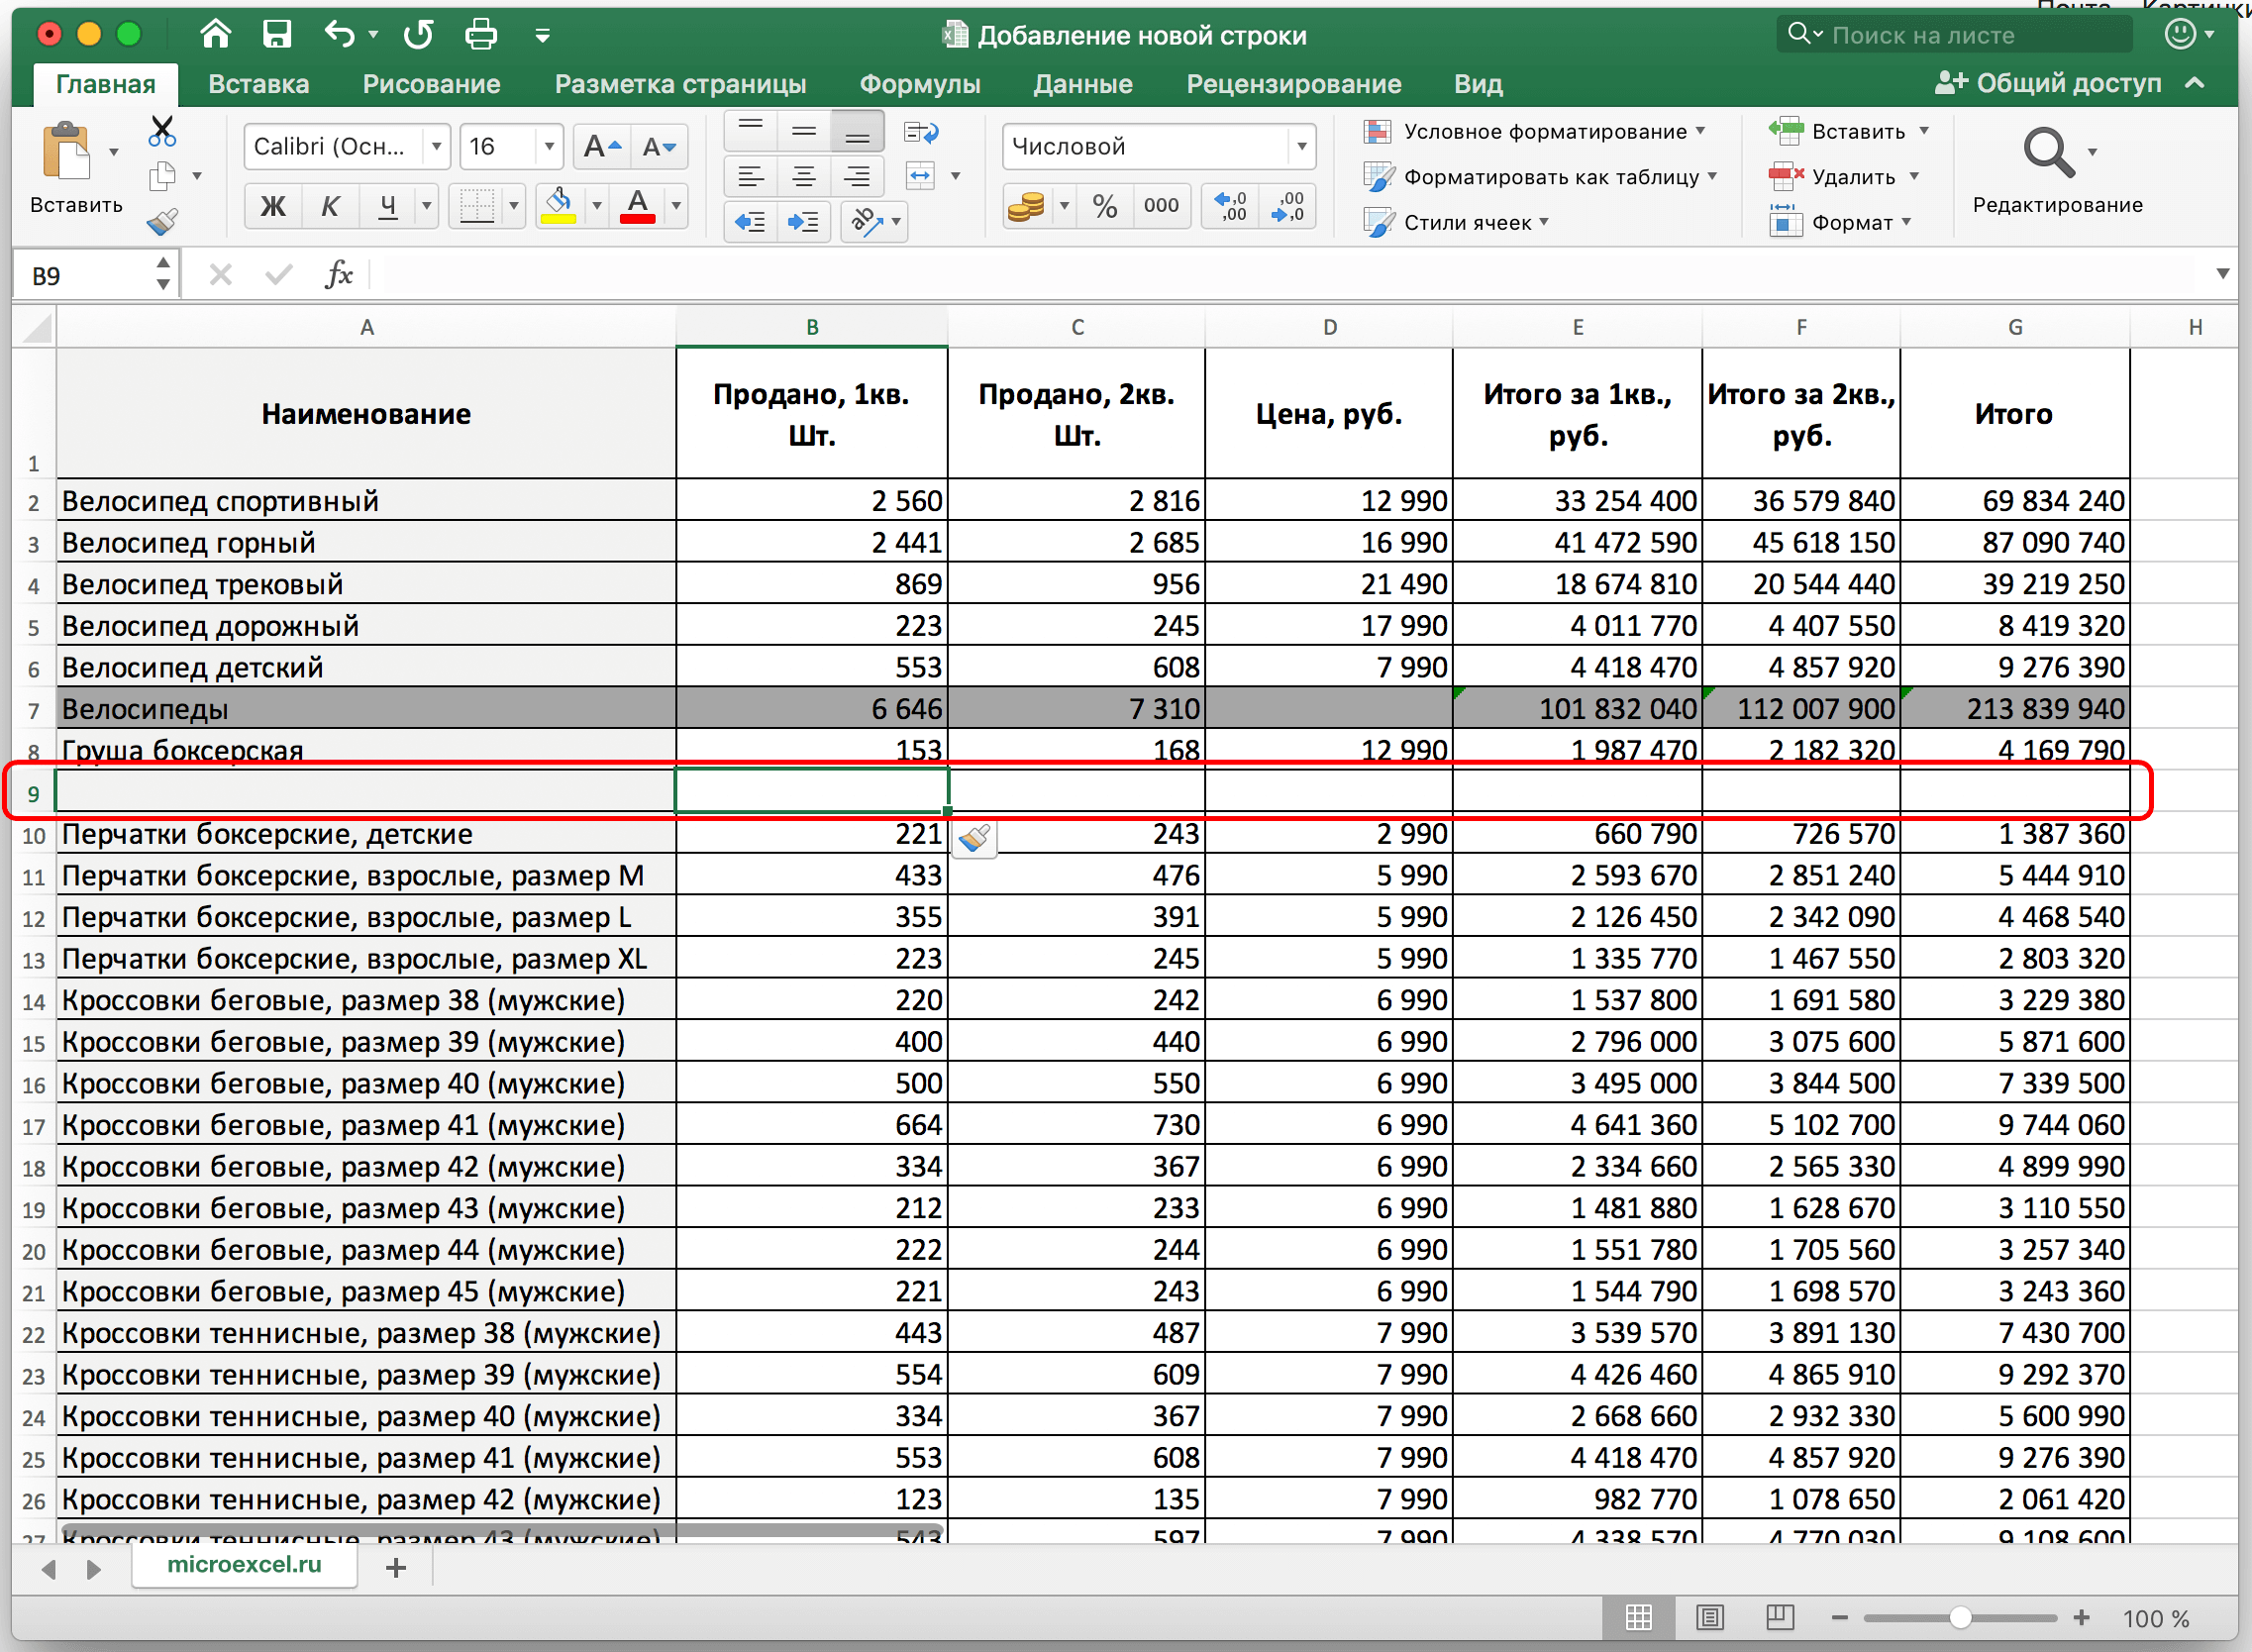 How to add a new row in Excel